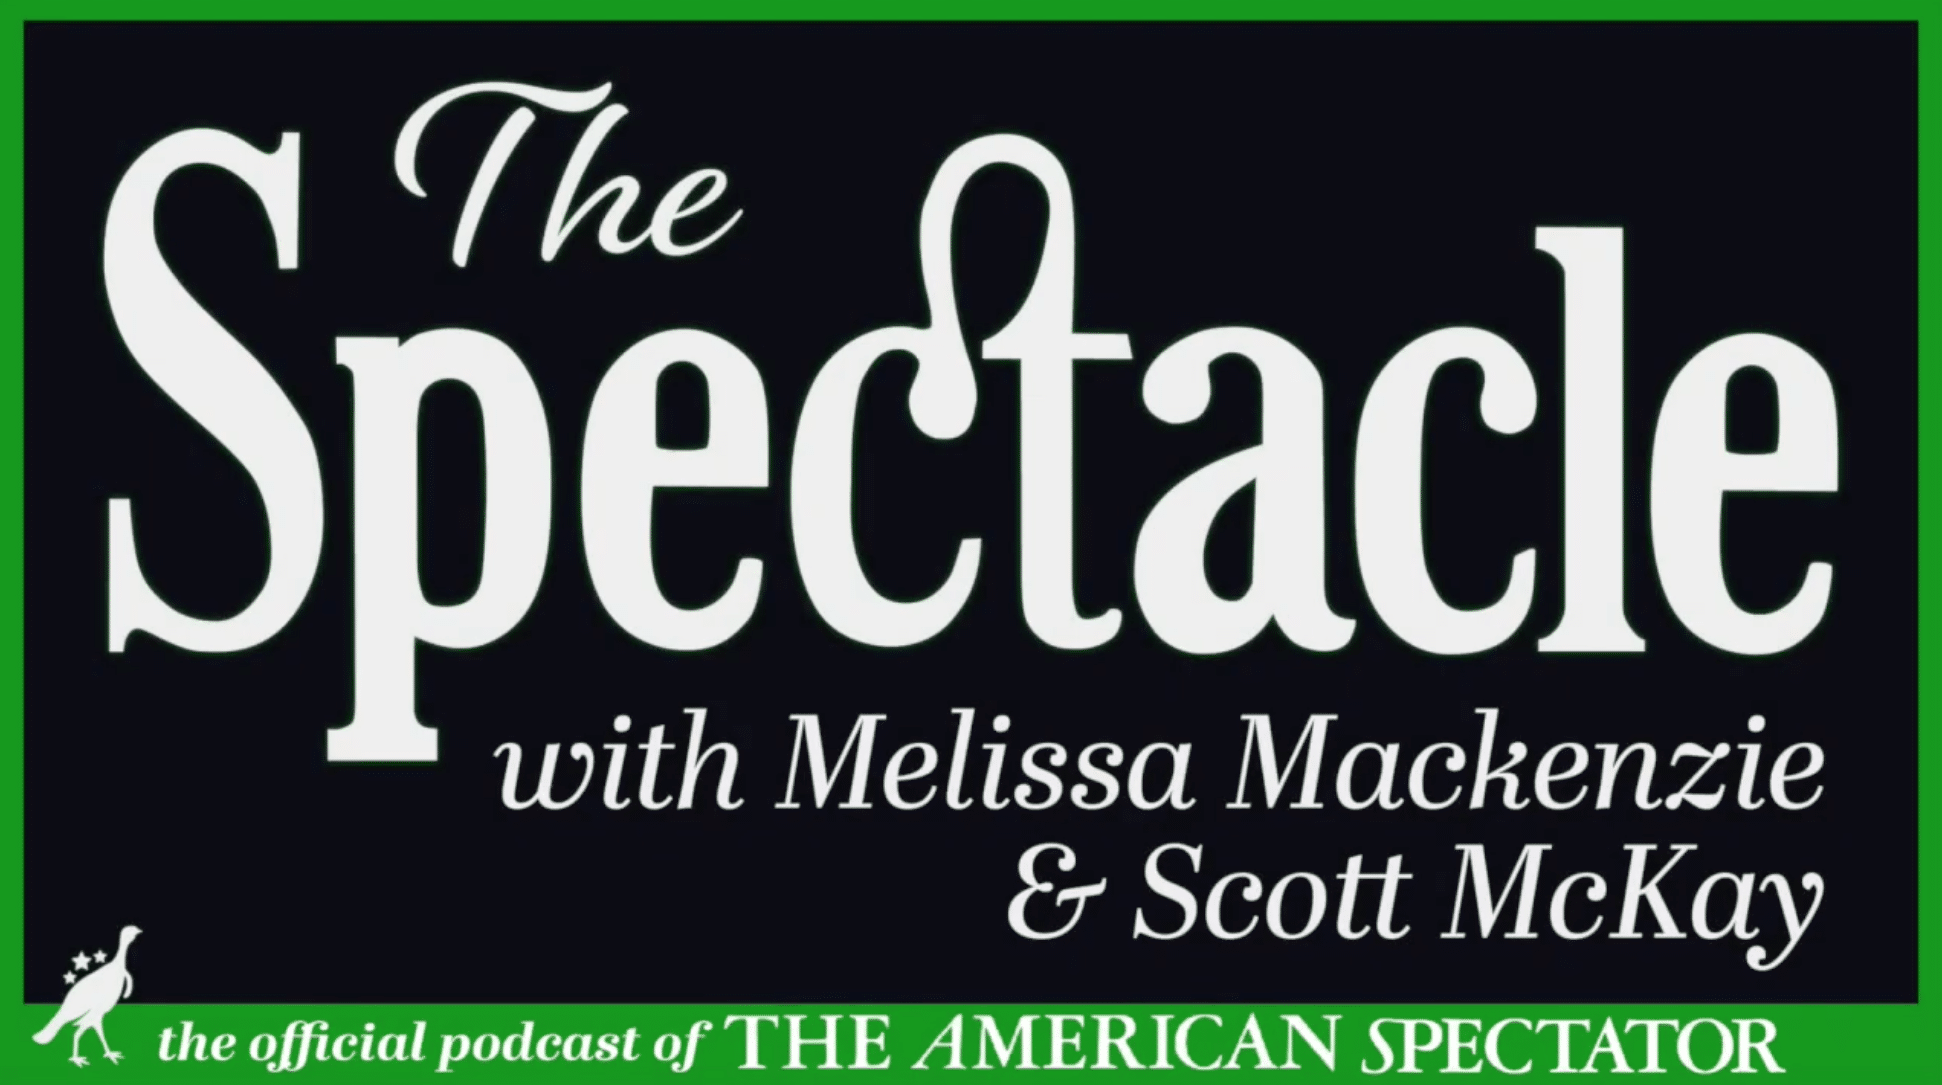 Spectacle Podcast